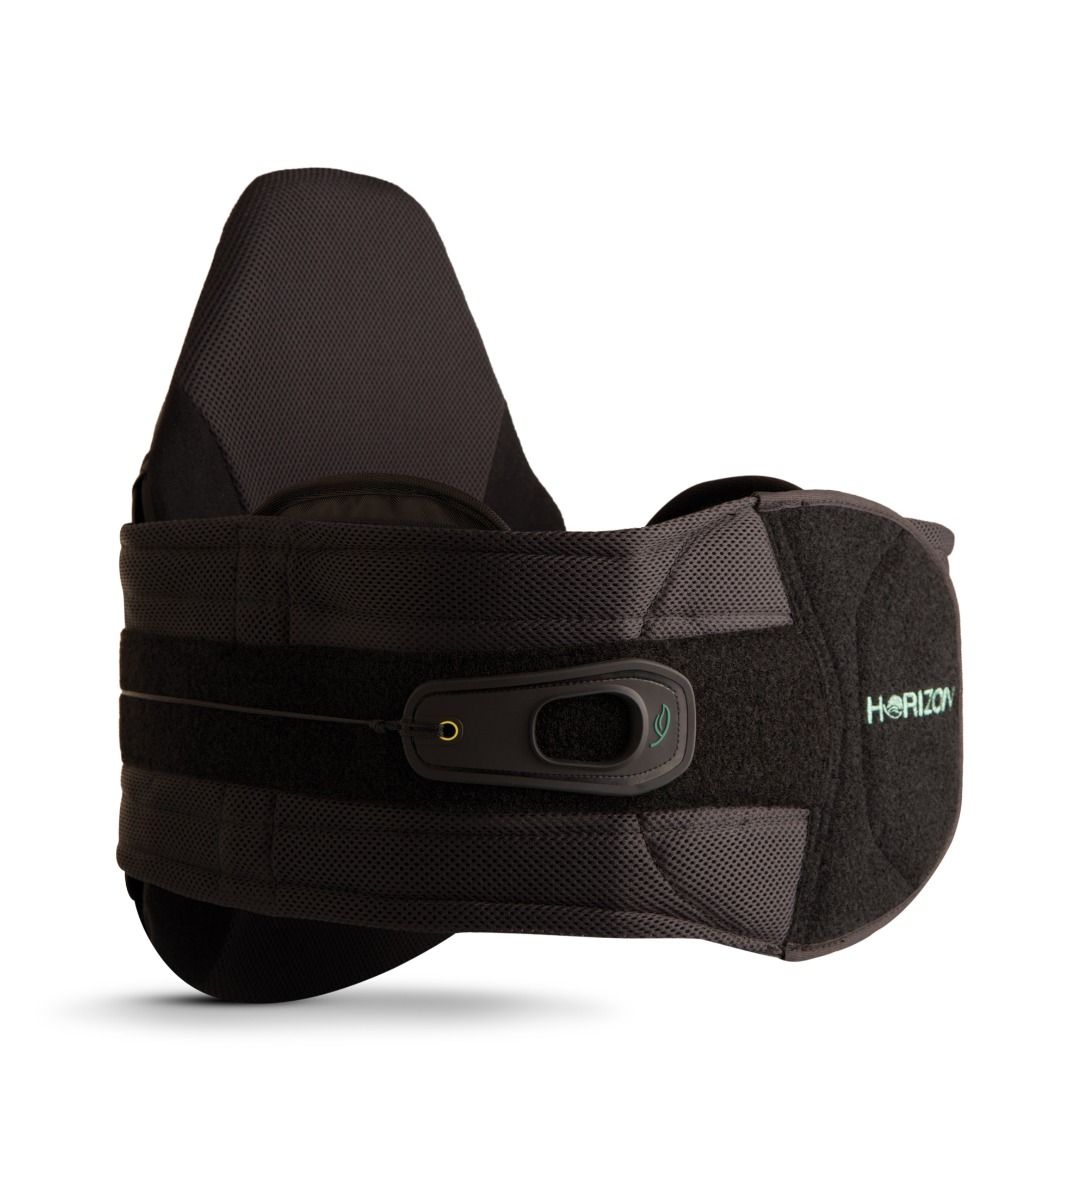 Horizon 637 LSO Back Brace - Peoples Care Medical Supply